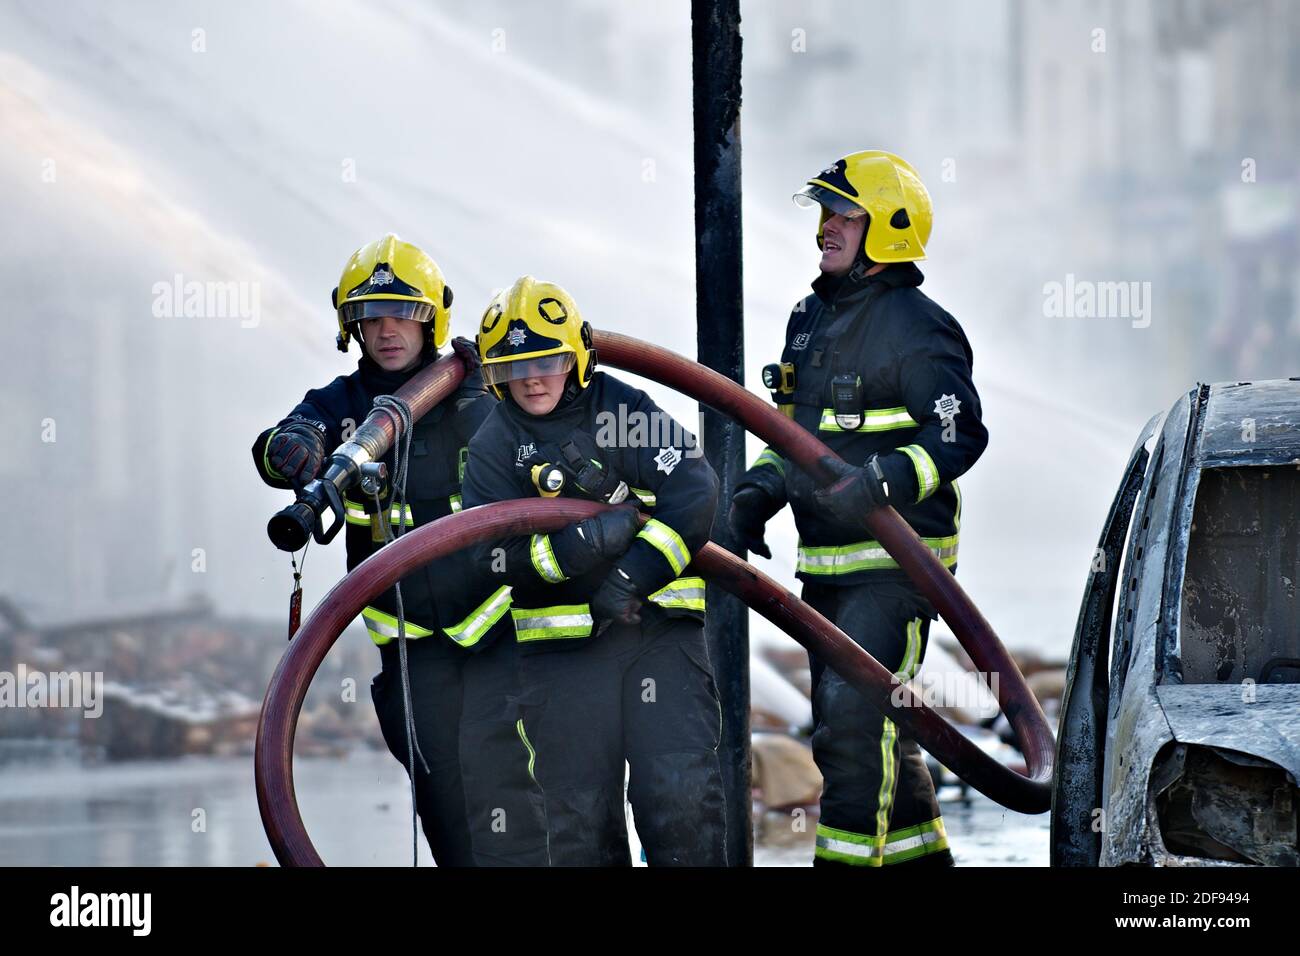 London, England - August 9, 2011: Firefighters in London at the aftermath of riots in Croydon pulling a hose to a new position  Three firefighters dra Stock Photo